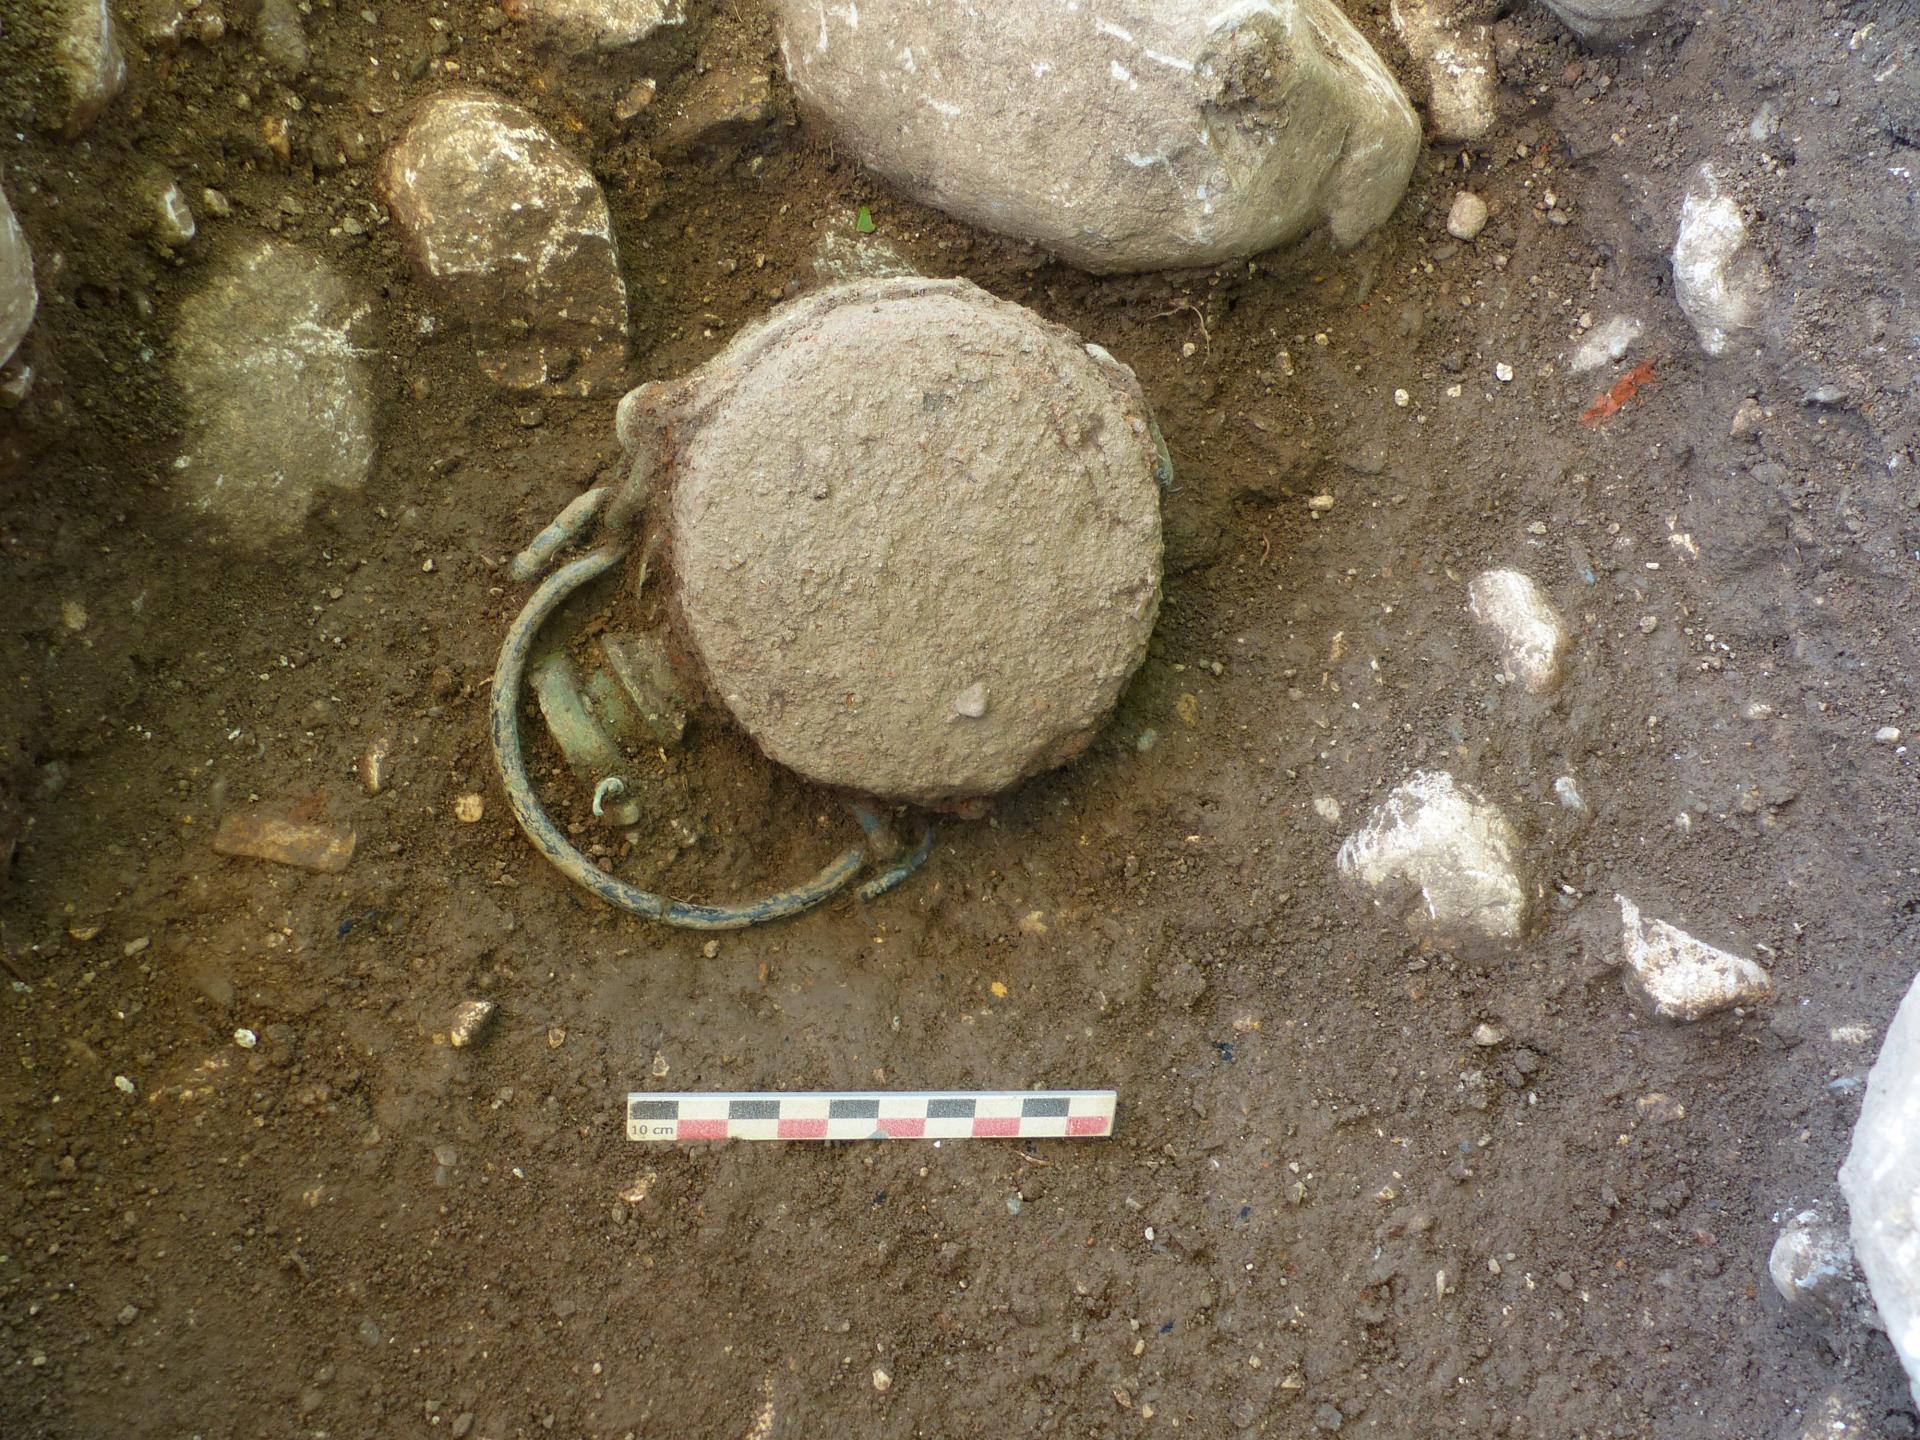 Pristine legionary canteen found at Roman sanctuary in France – The History Blog